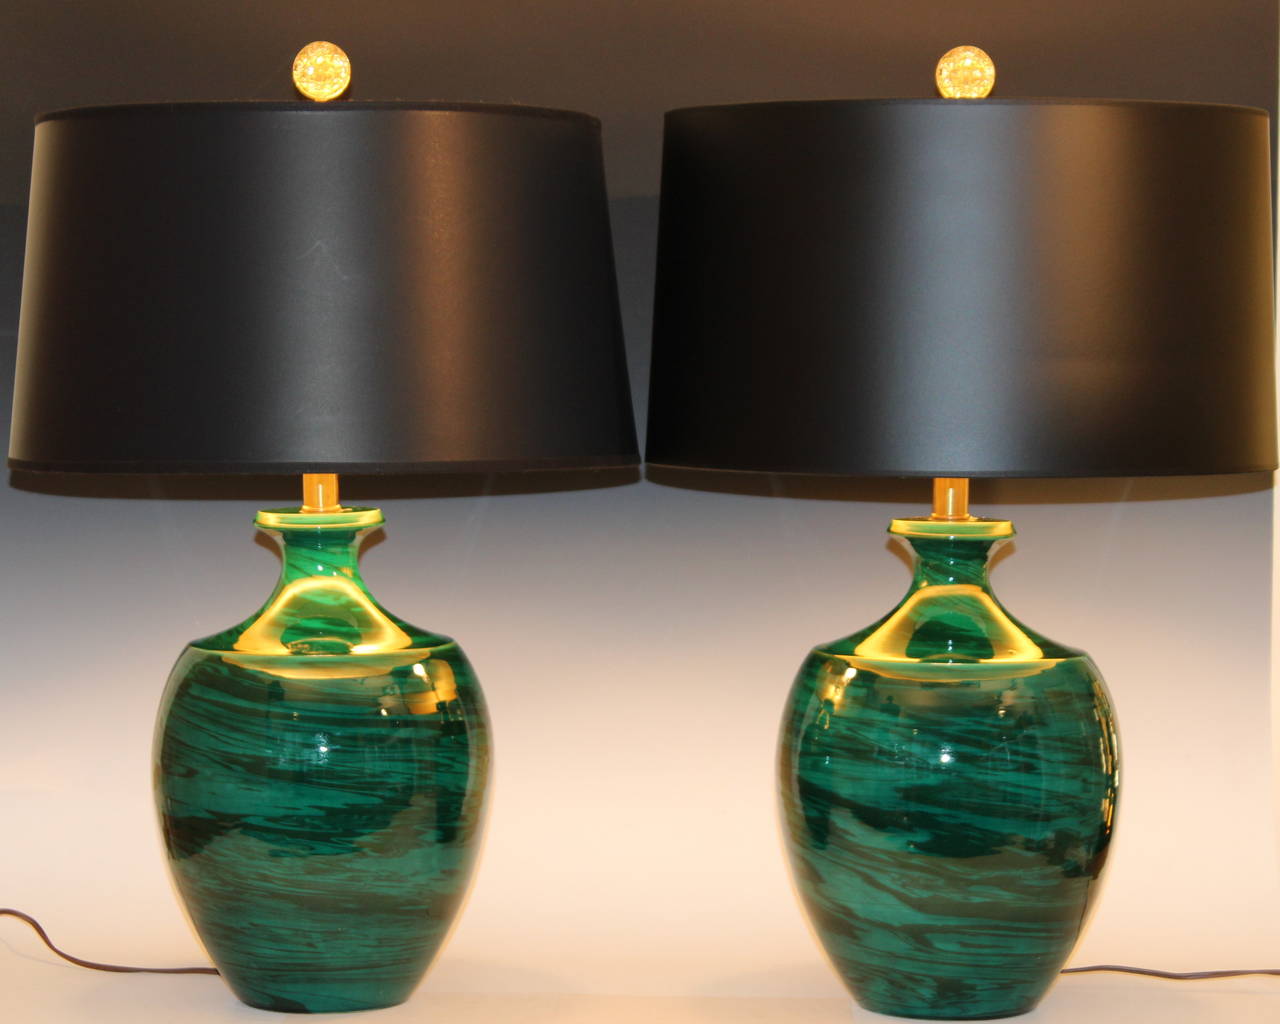 Pair of Vintage Bitossi Art Pottery Green Marbleized Raymor Lamps For Sale 3